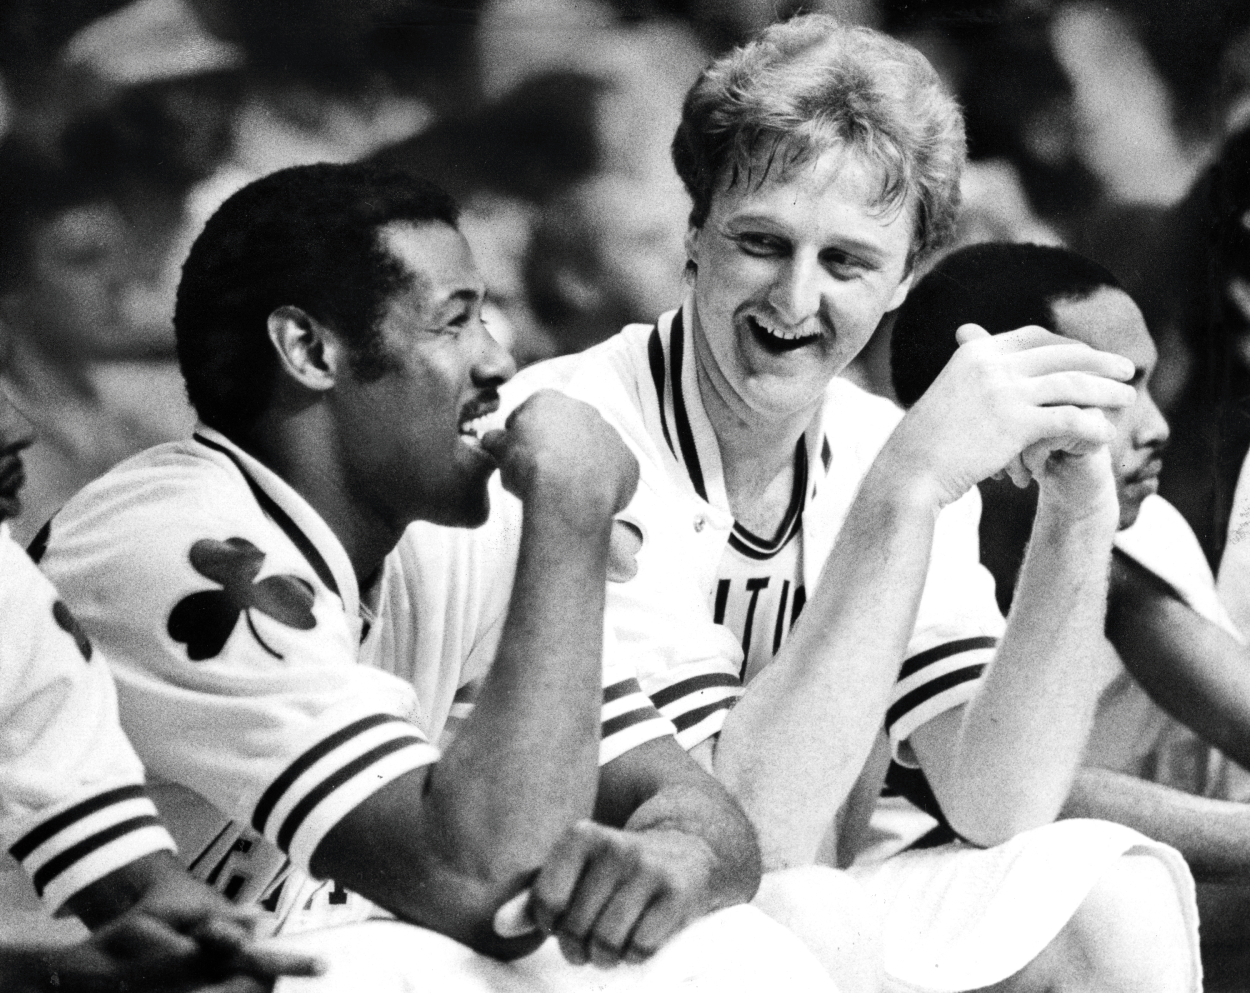 Boston Celtics' M.L. Carr, left, and Larry Bird share a laugh on the bench.